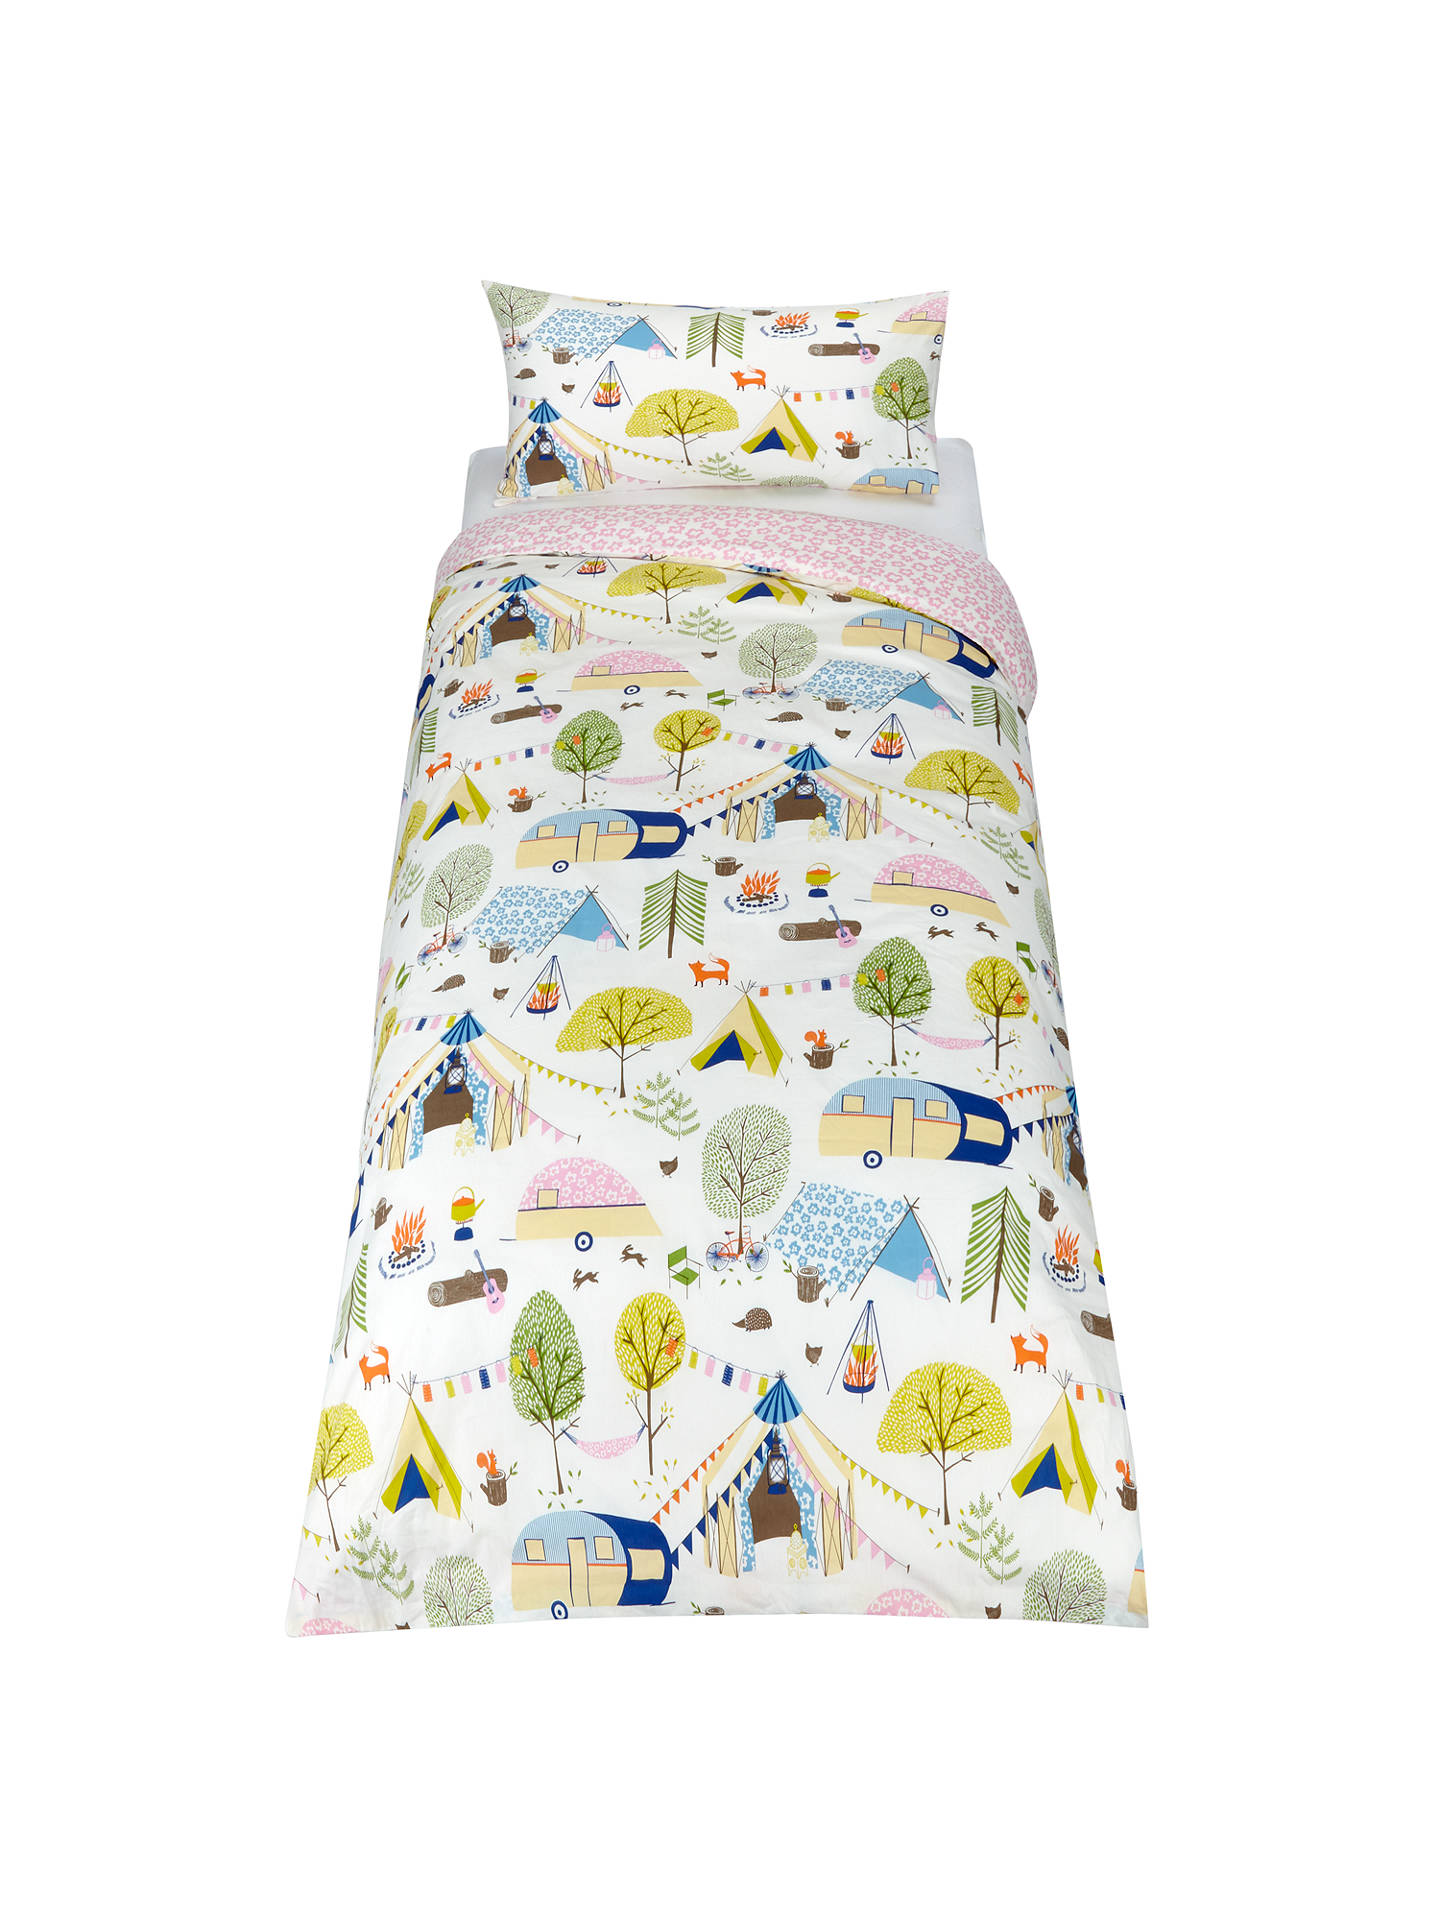 Little Home At John Lewis Camping Duvet Cover And Pillowcase Set